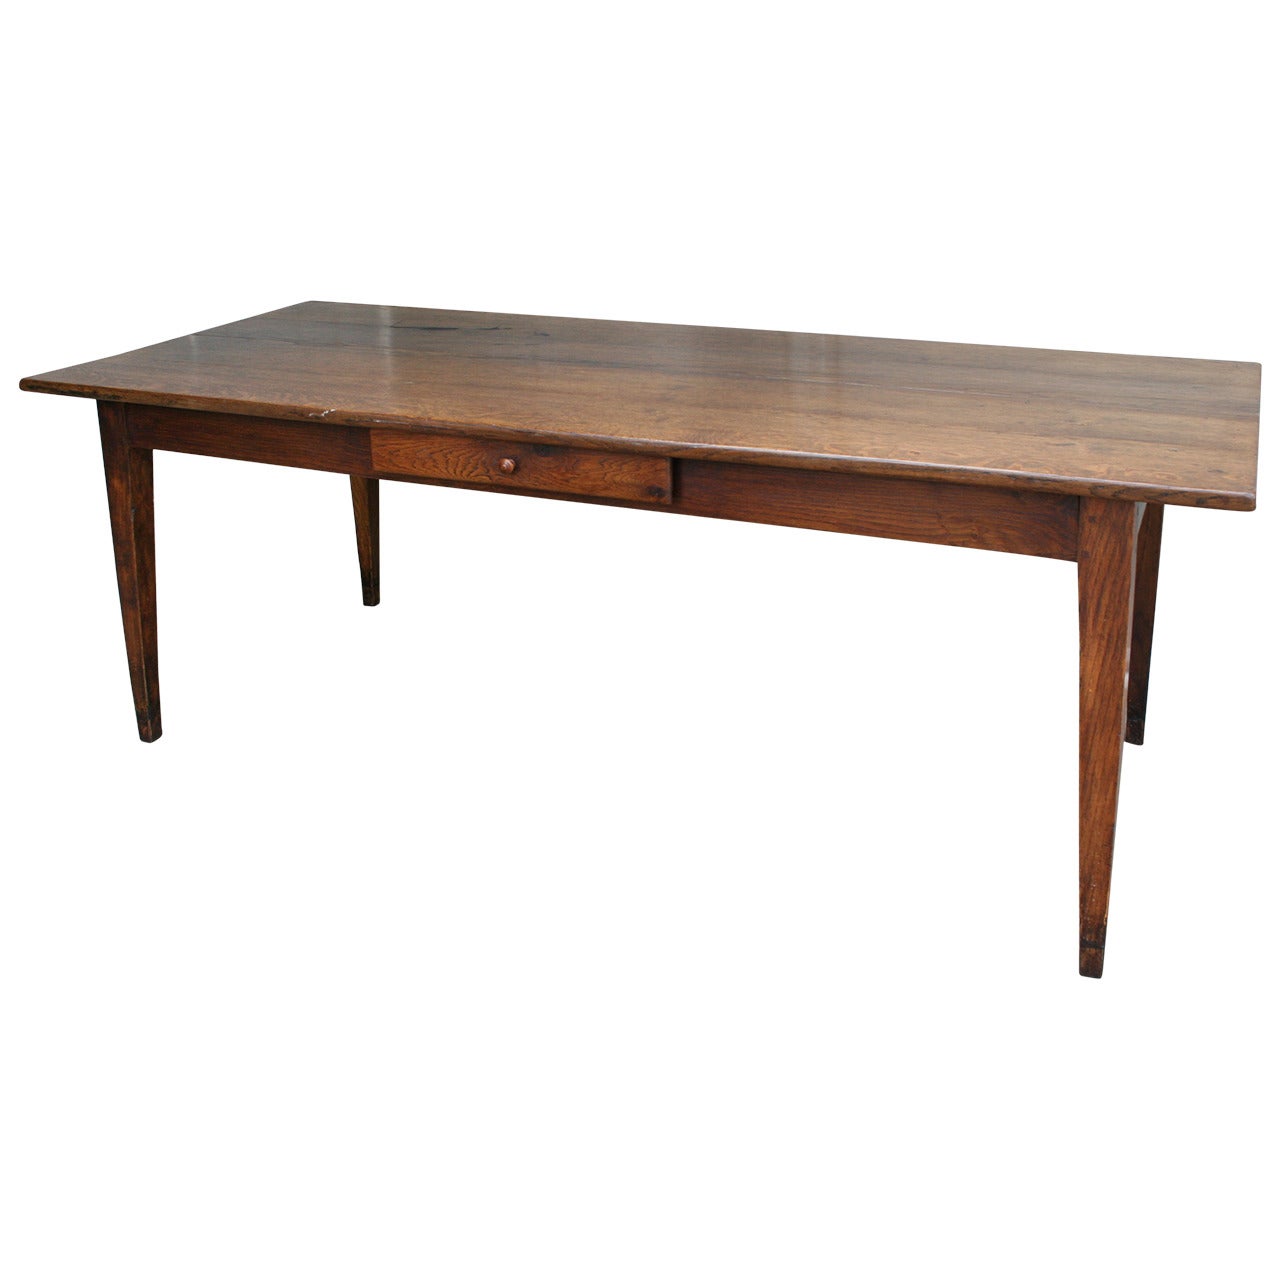 19th Century French Oak Farm Table with Drawer from Le Perche